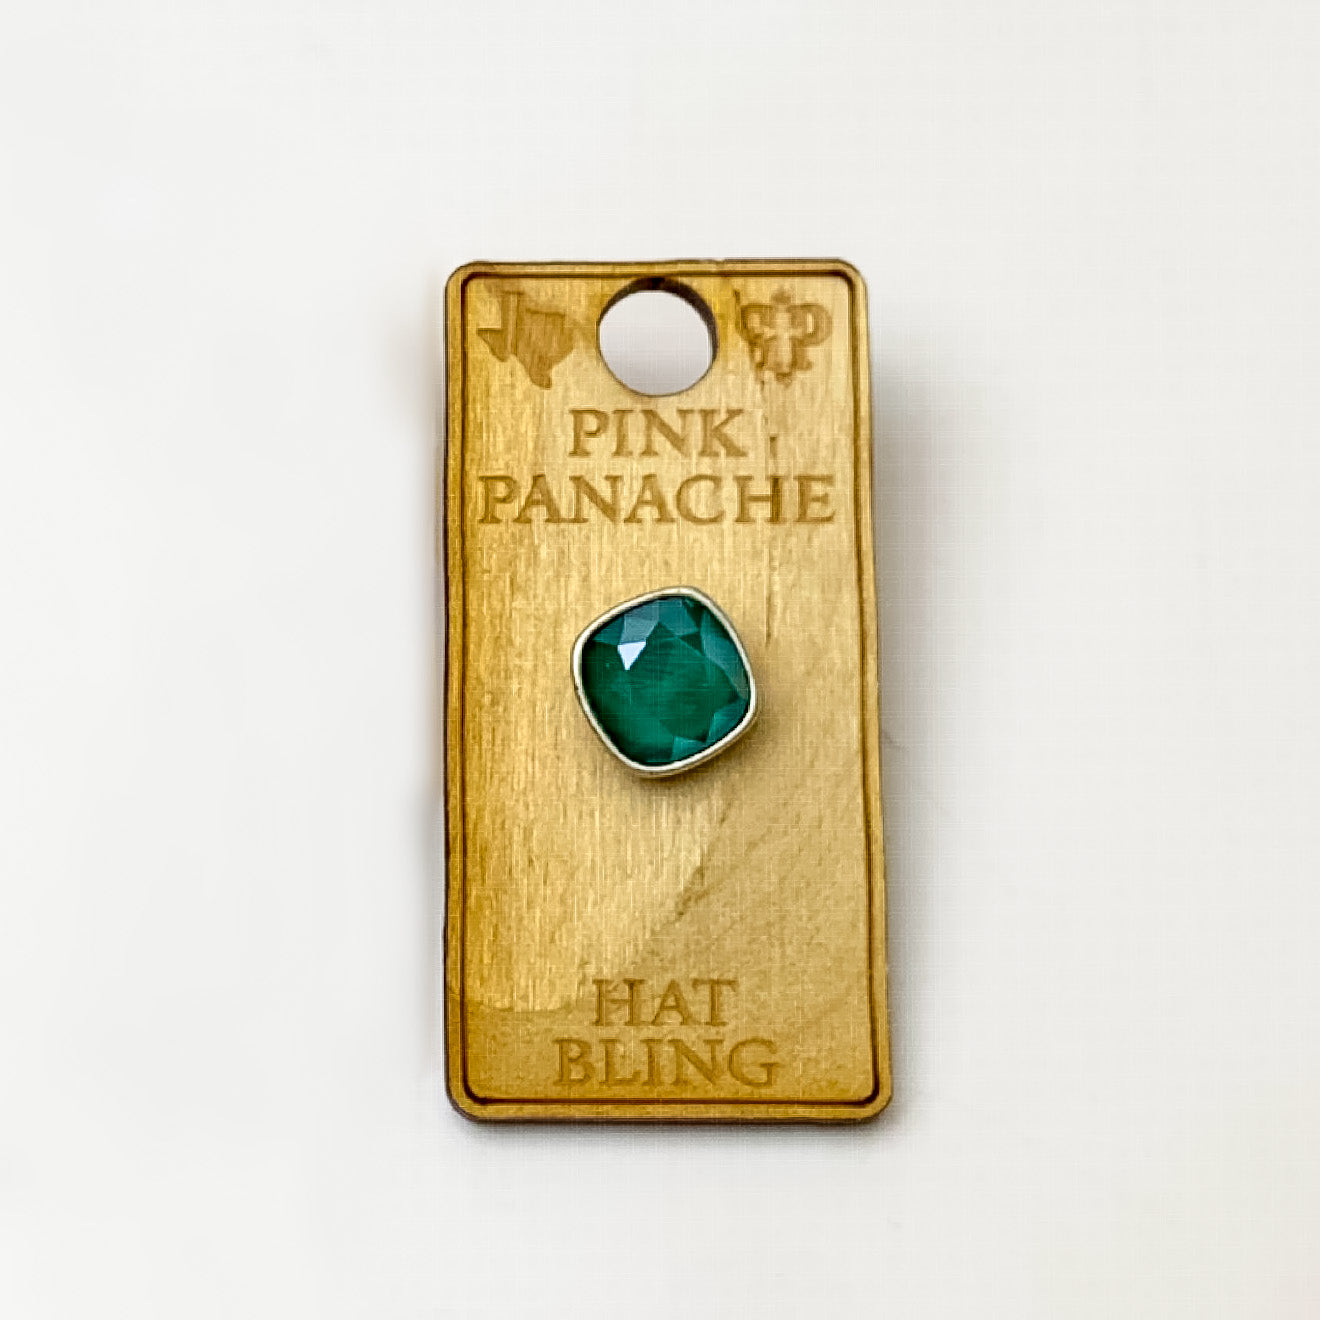 Silver, square hat pin with a royal green cushion cut crystal. This hat pin is pictured on a wooden Pink Panache holder on a white background.